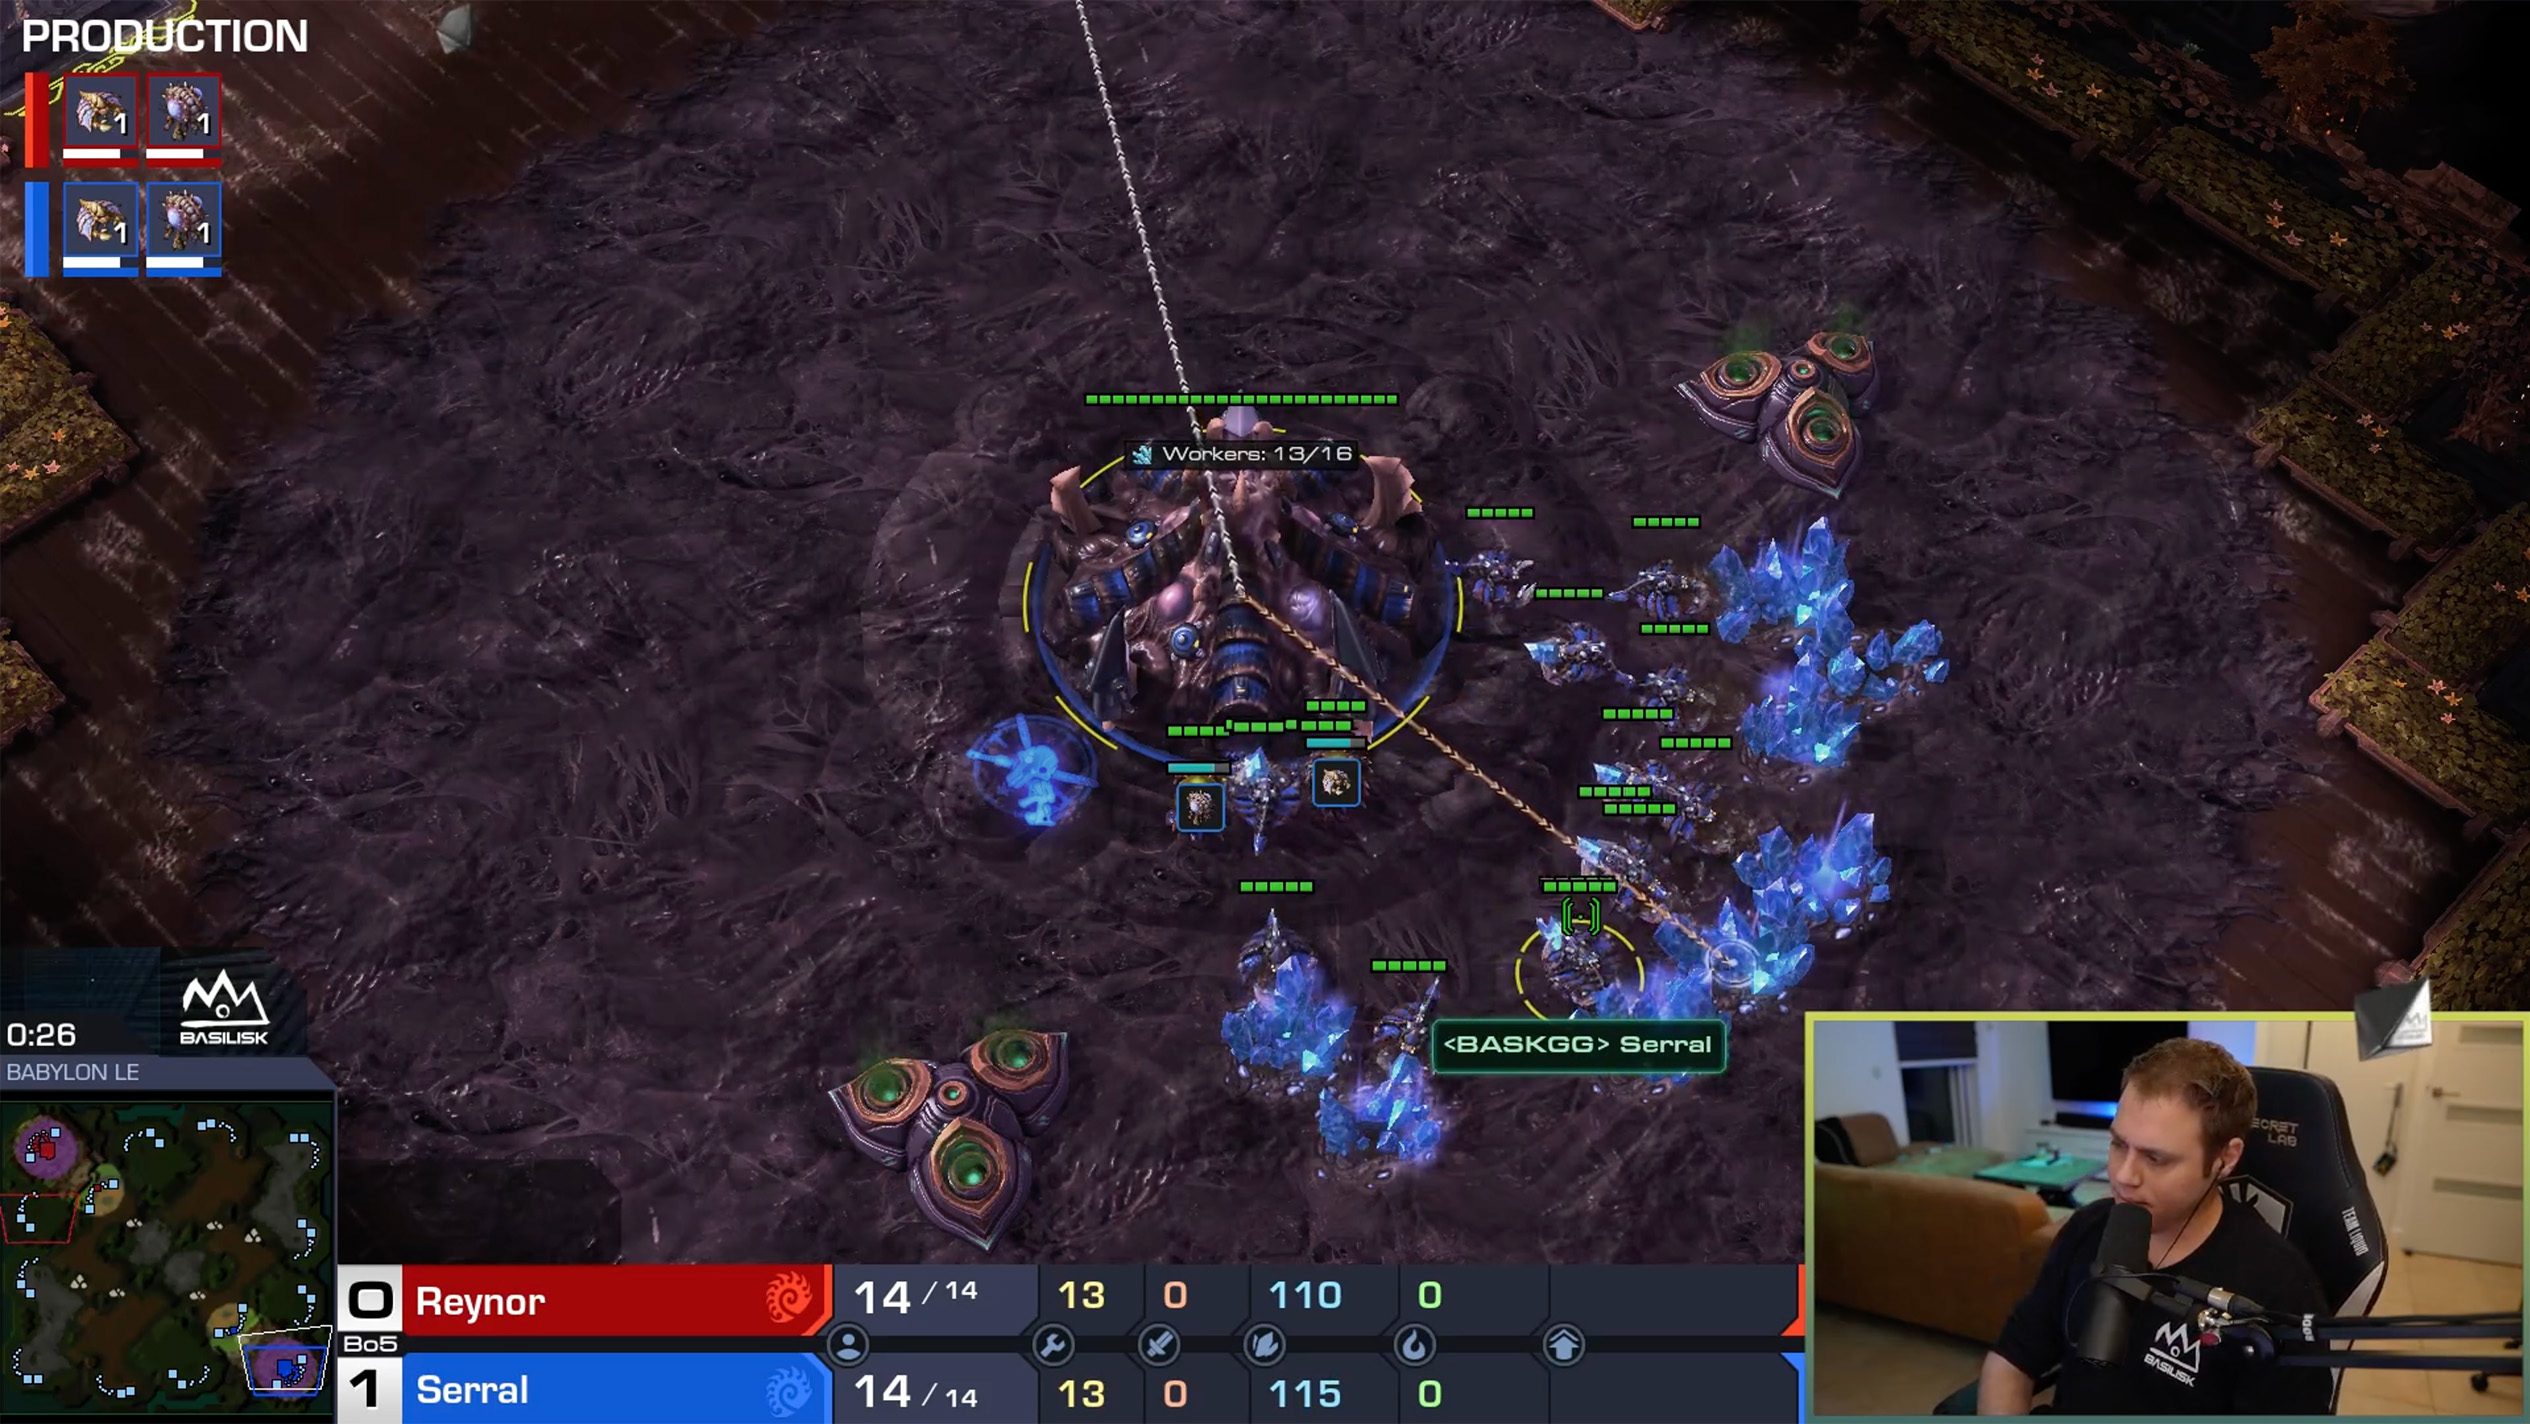 StarCraft II gameplay footage from BASILISK Big Brain Bouts event series